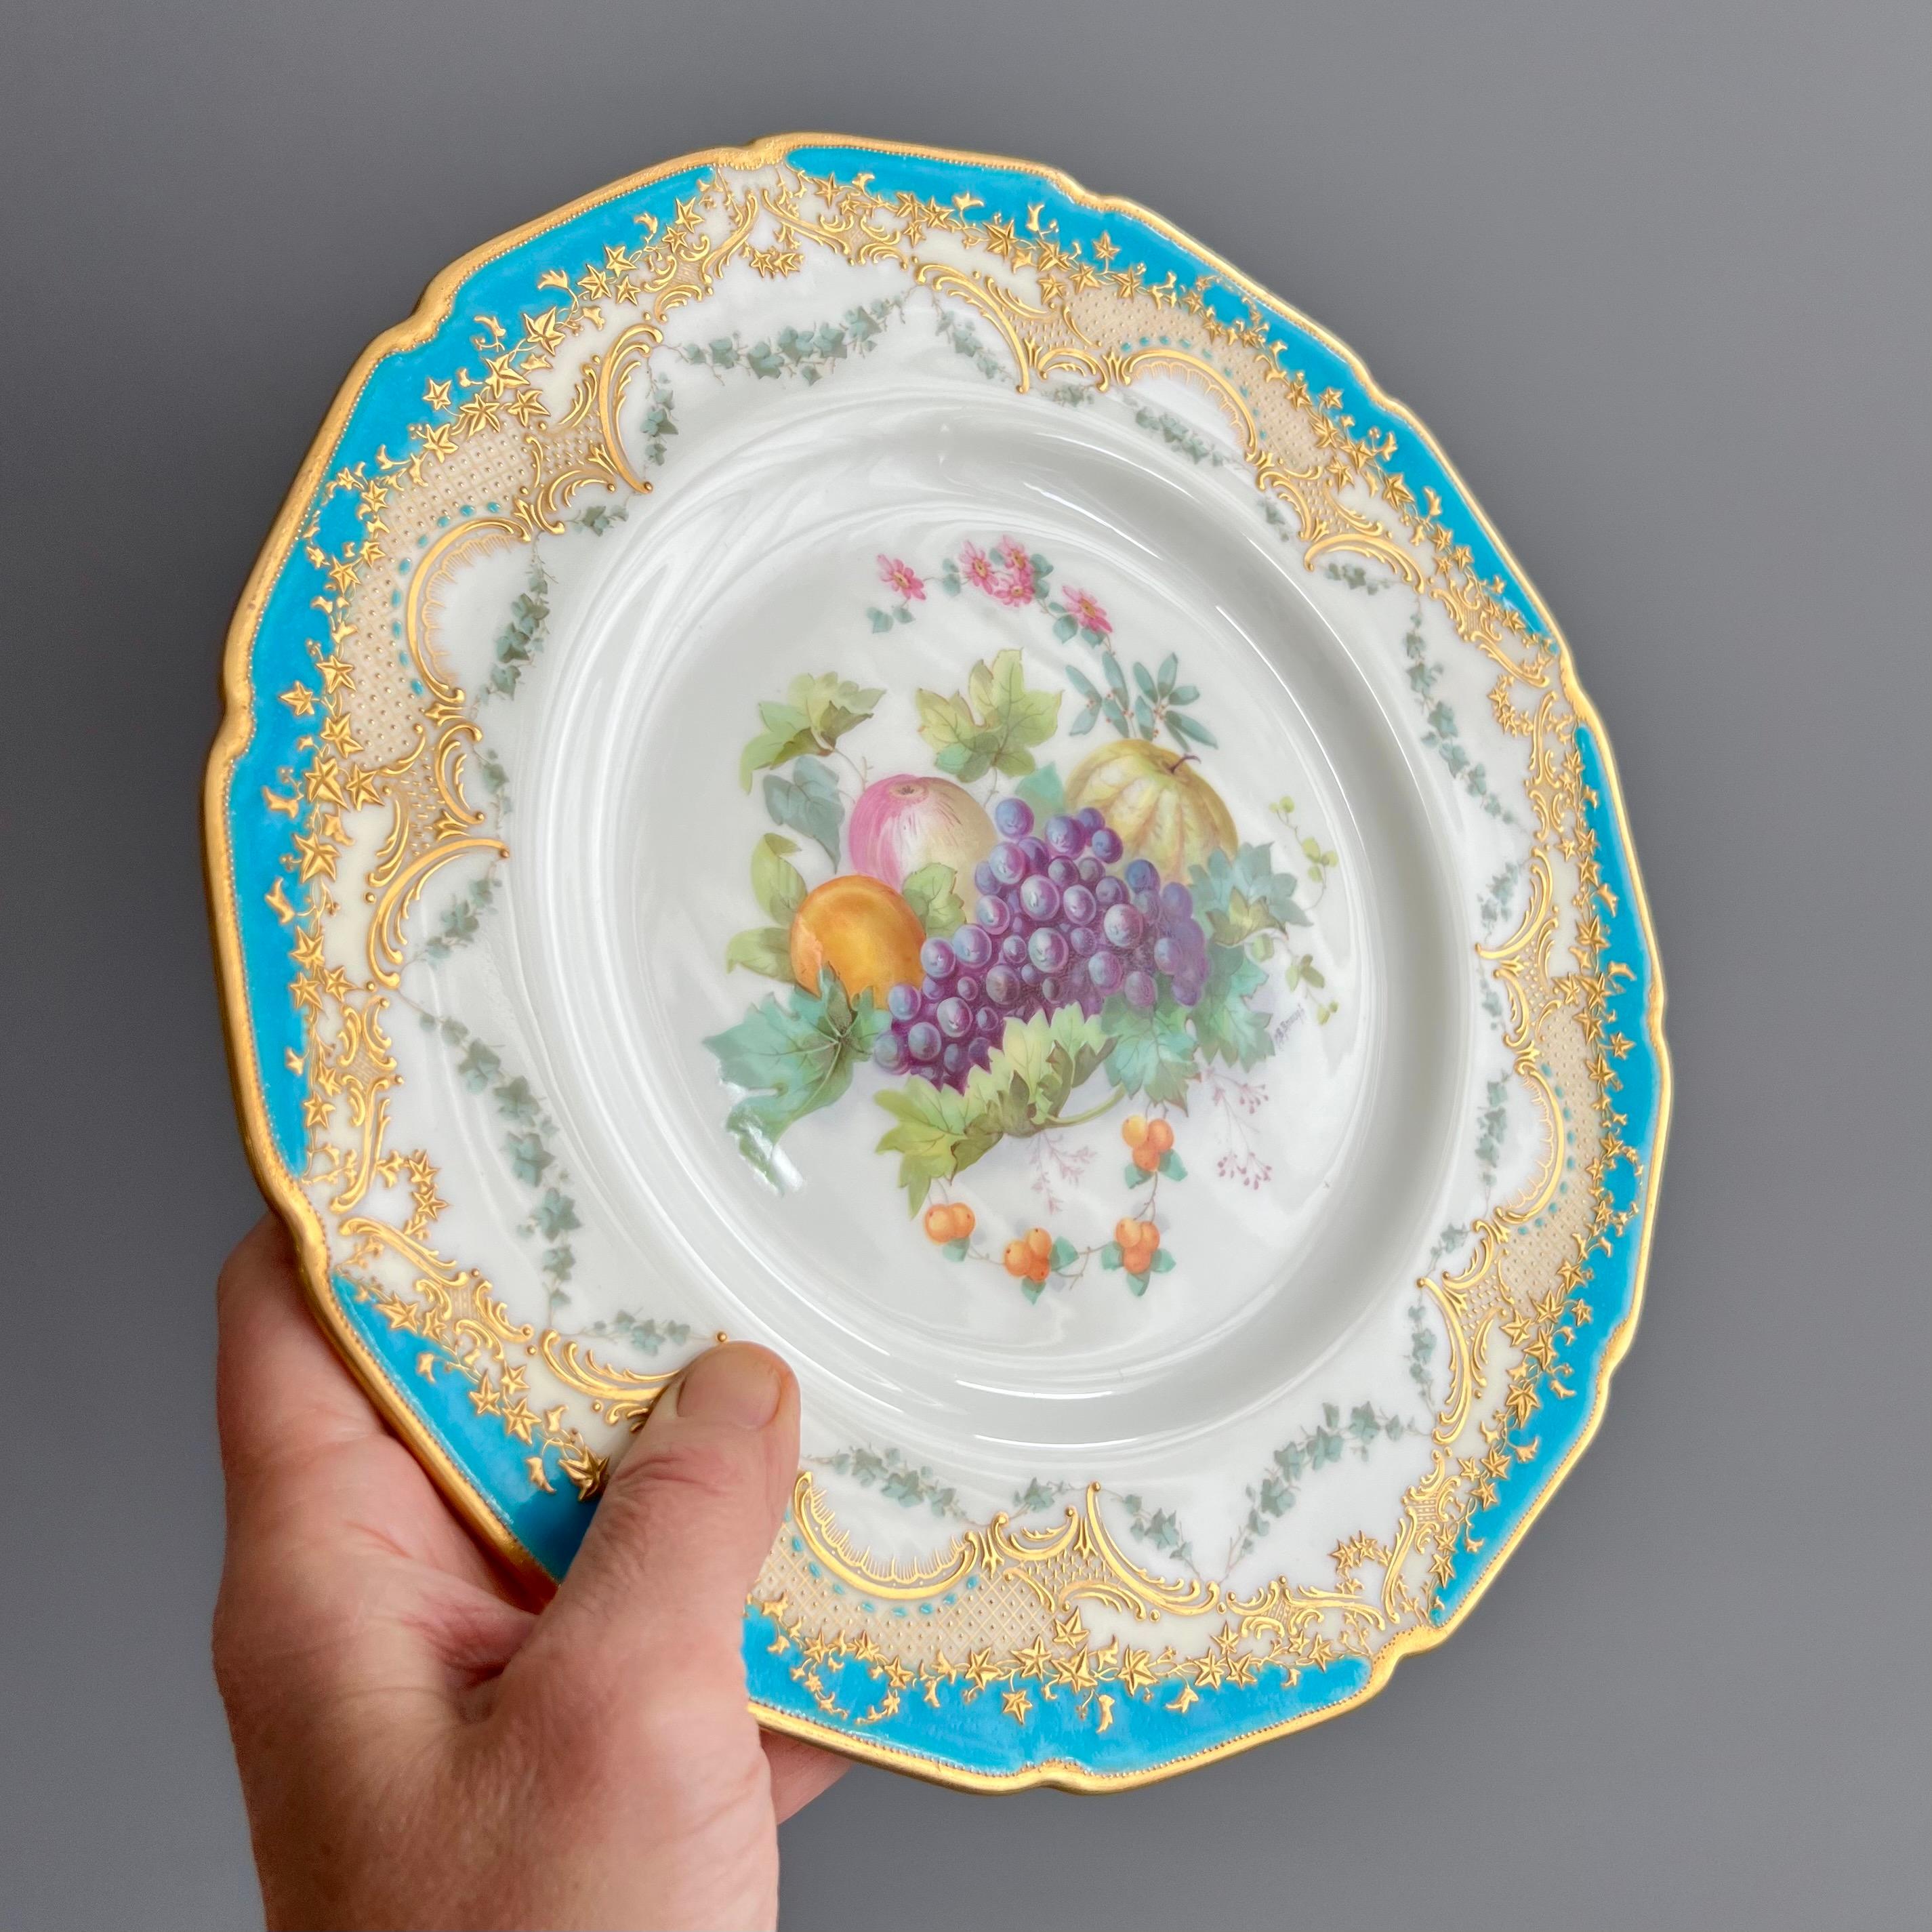 Hand-Painted Royal Doulton Porcelain Pair of Plates, Fruit Paintings by C B Brough, 1903